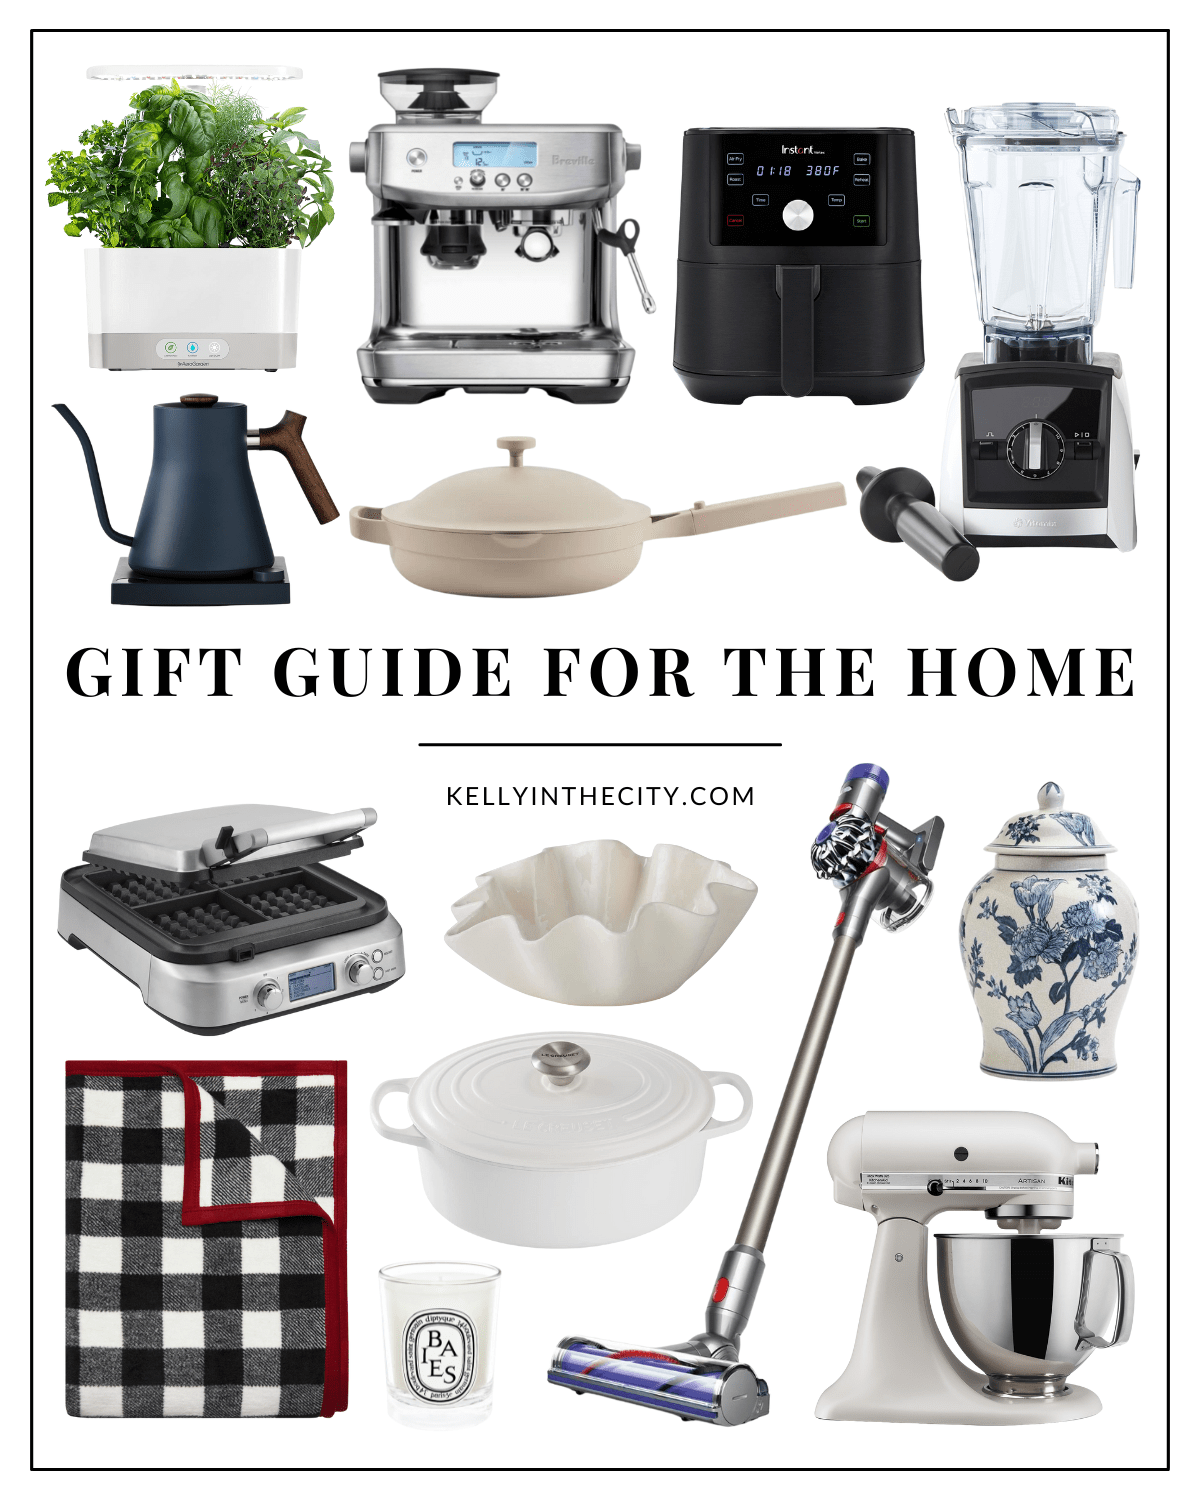 Gift Guide for the Home